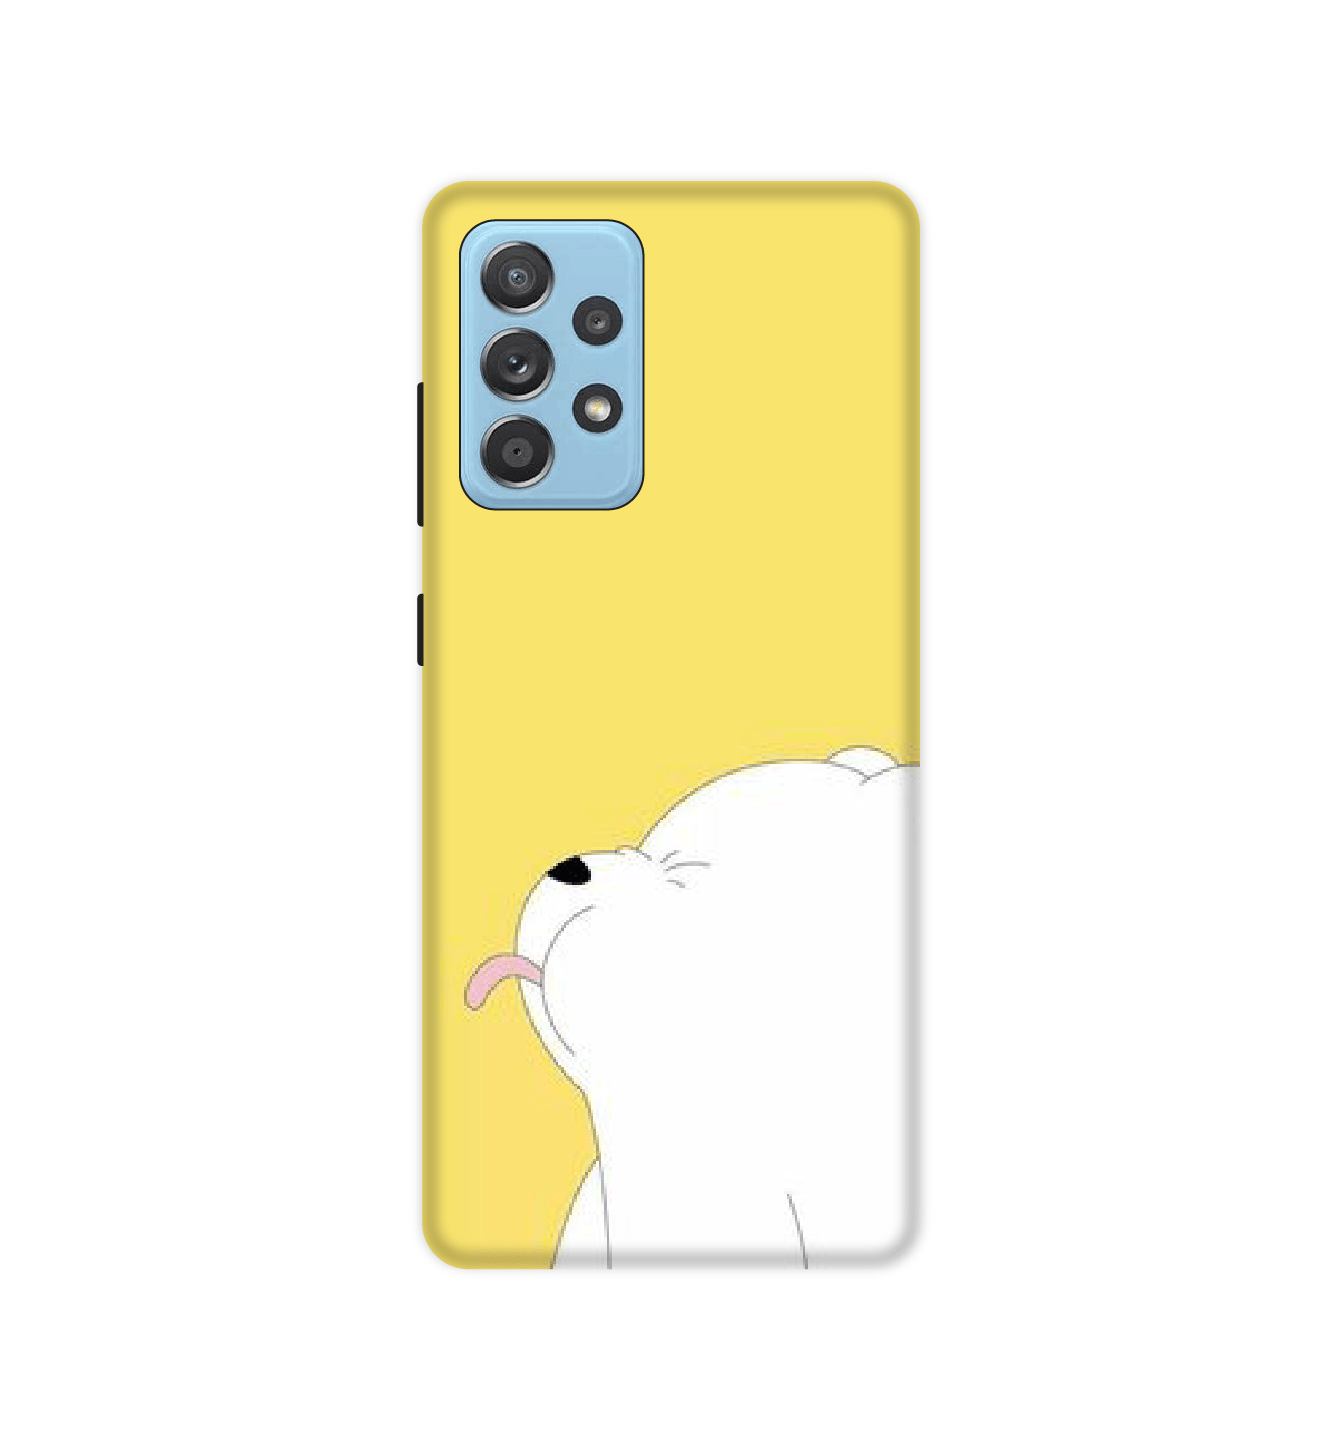 White Teddy On Yellow Background - Hard Case For Samsung Models